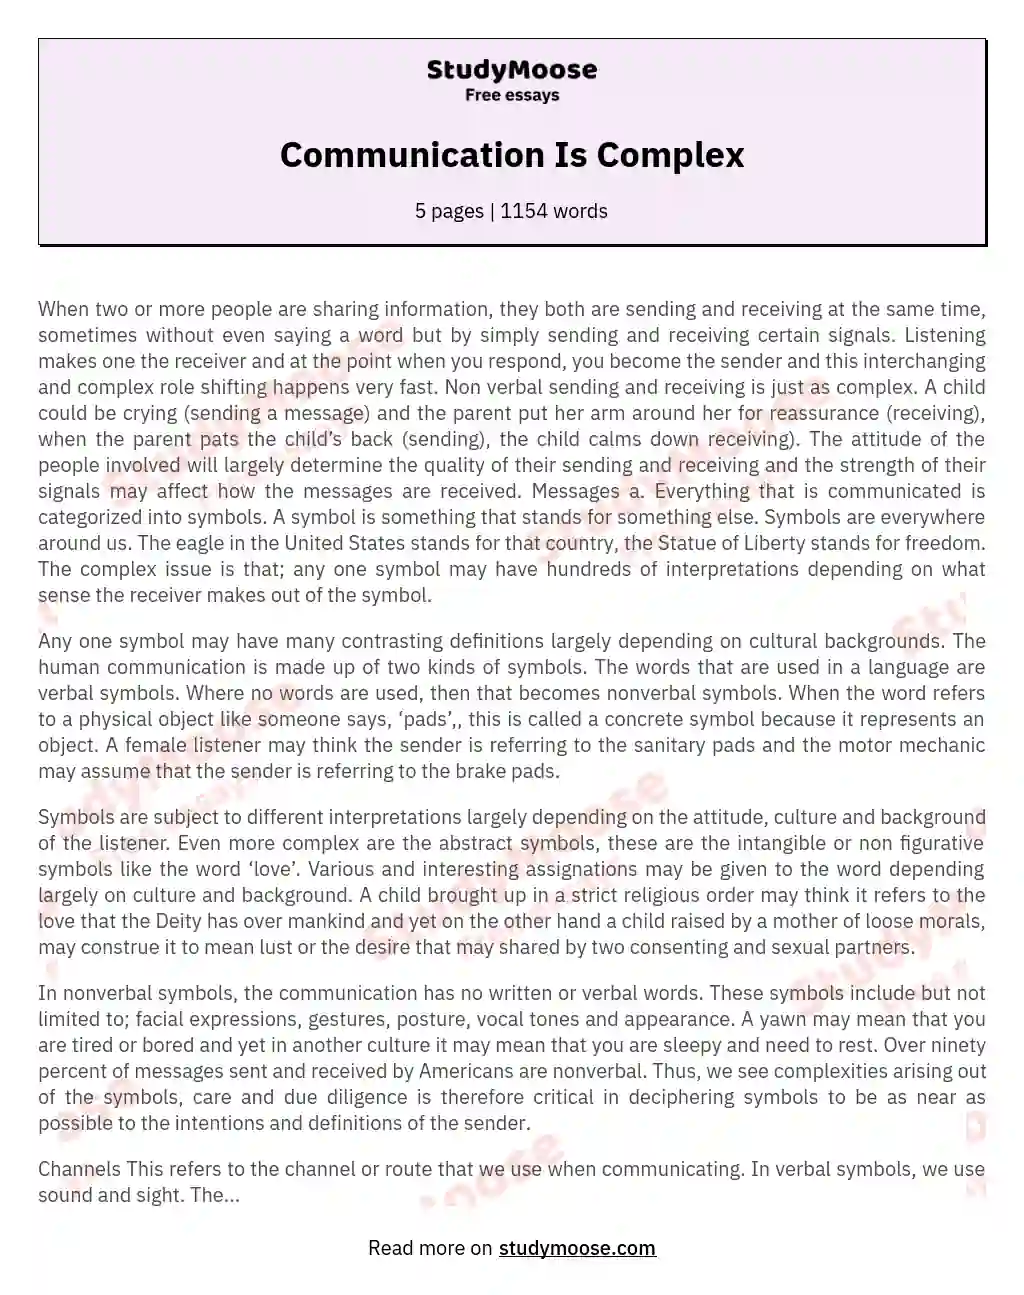 Communication Is Complex essay